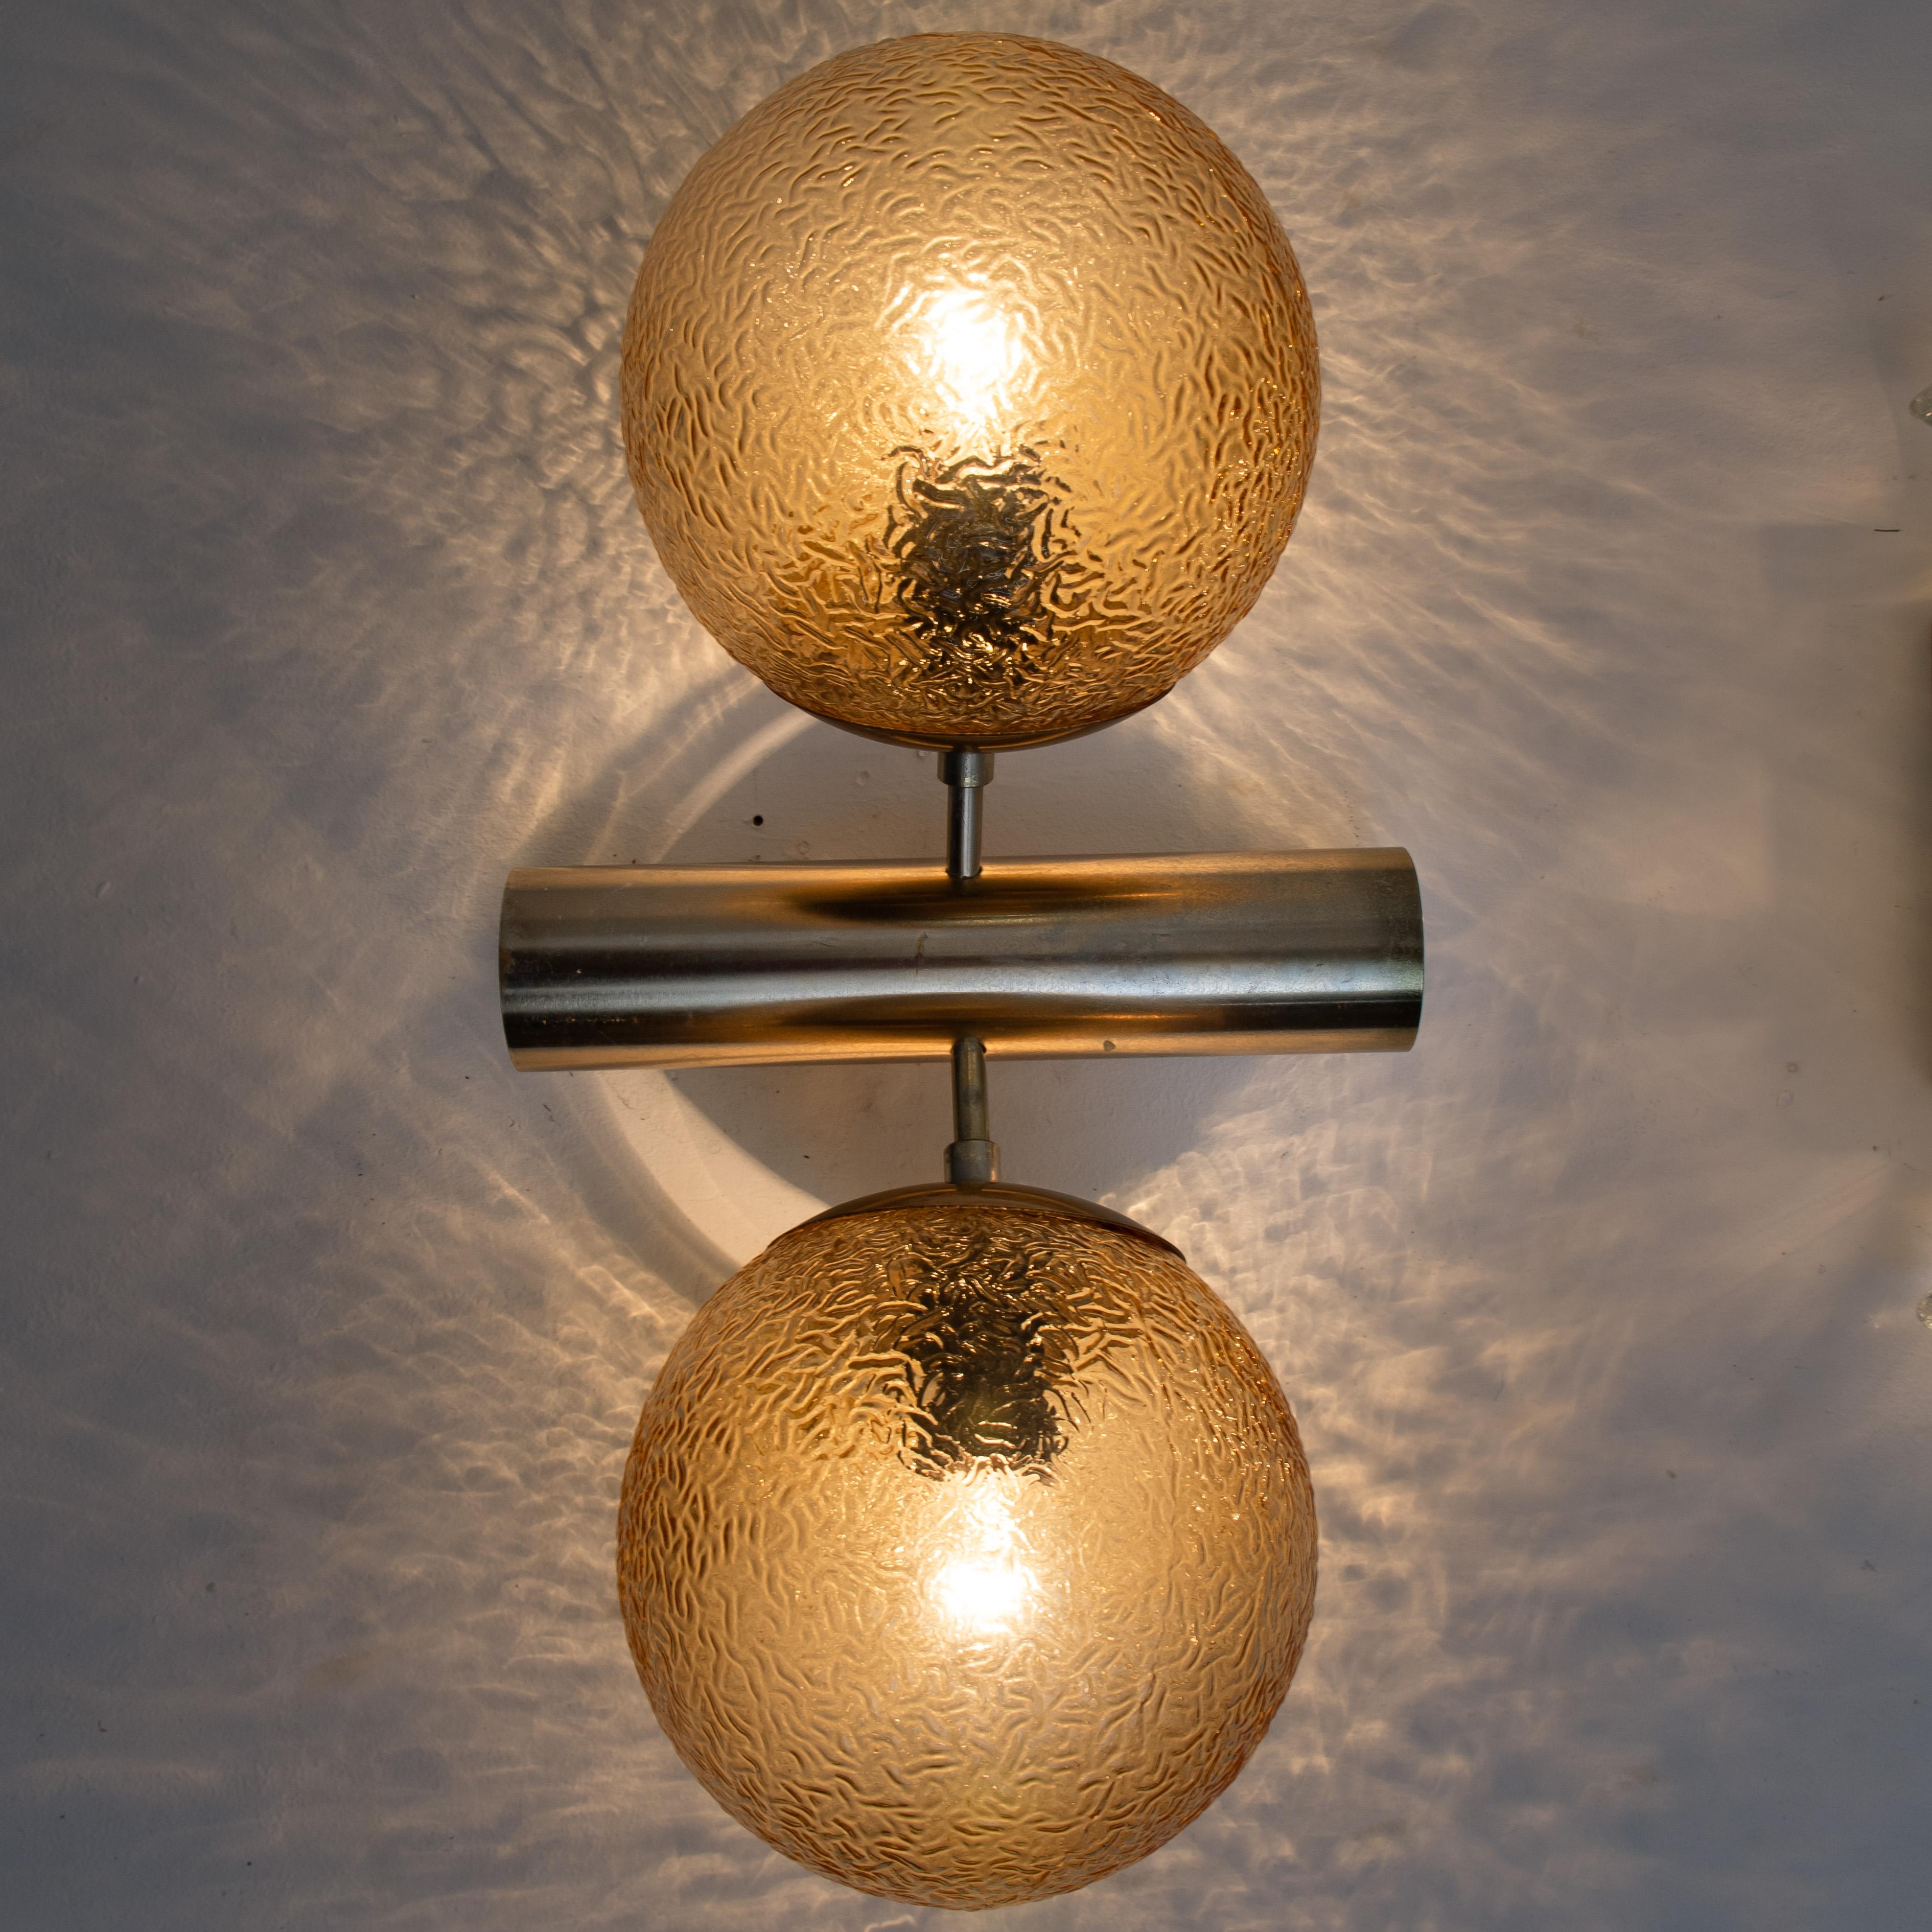 20th Century 1 of the 4 Molecular Wall Lights with Amber Glass Globes, 1960s